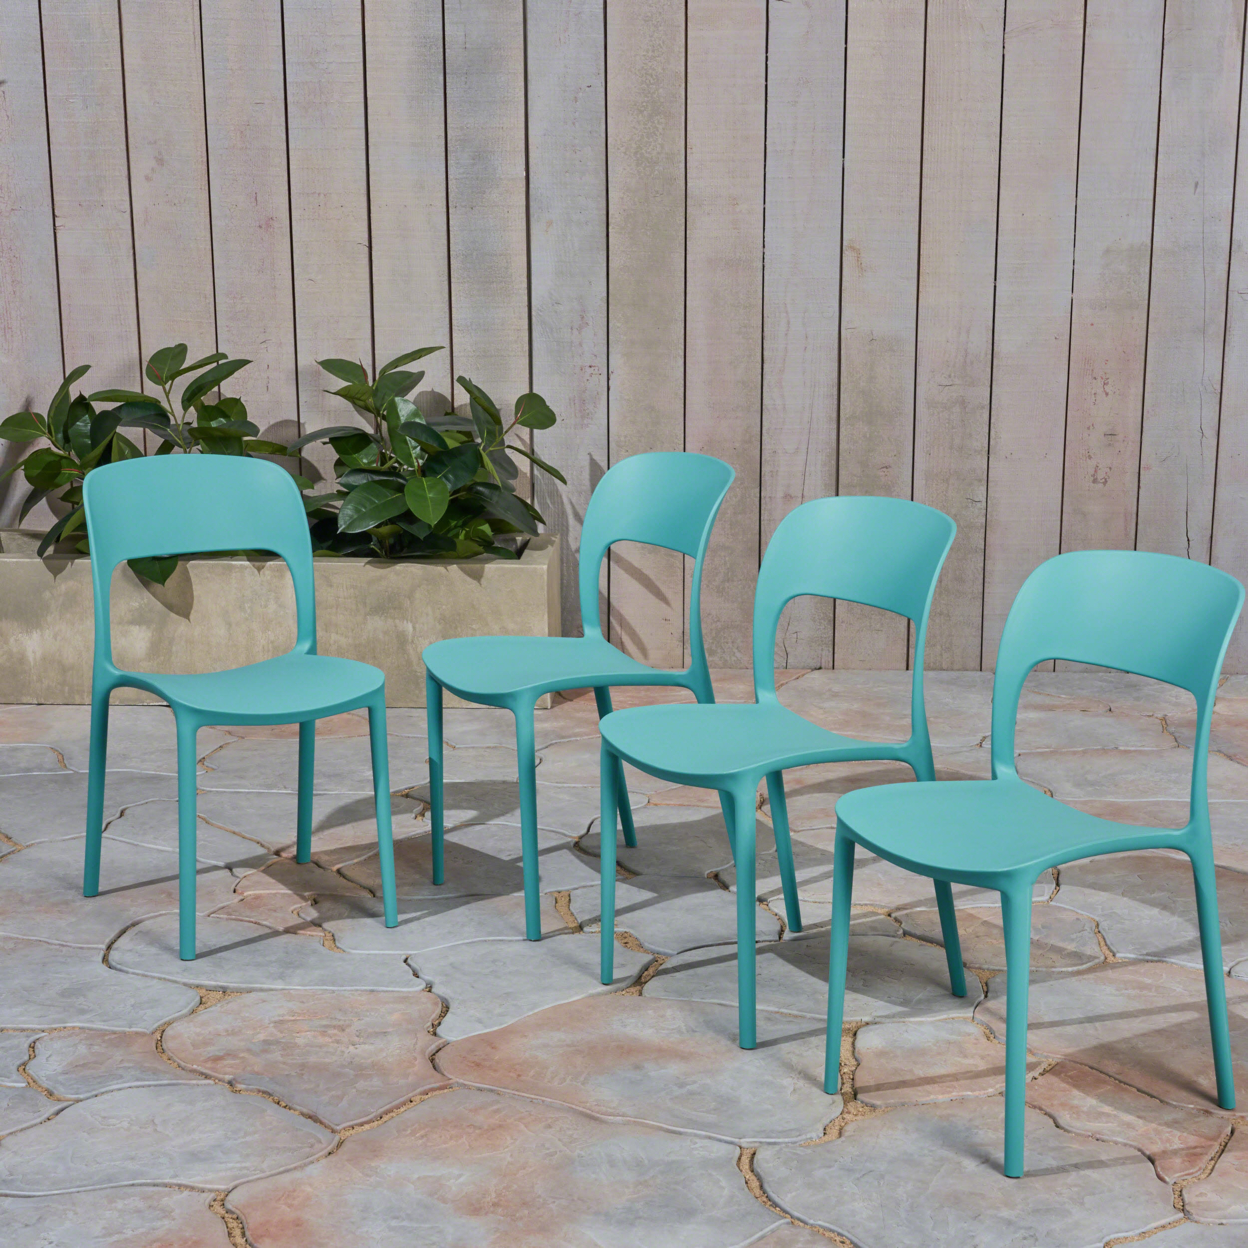 Dean Outdoor Plastic Chairs (Set Of 2) - Teal, Set Of 2